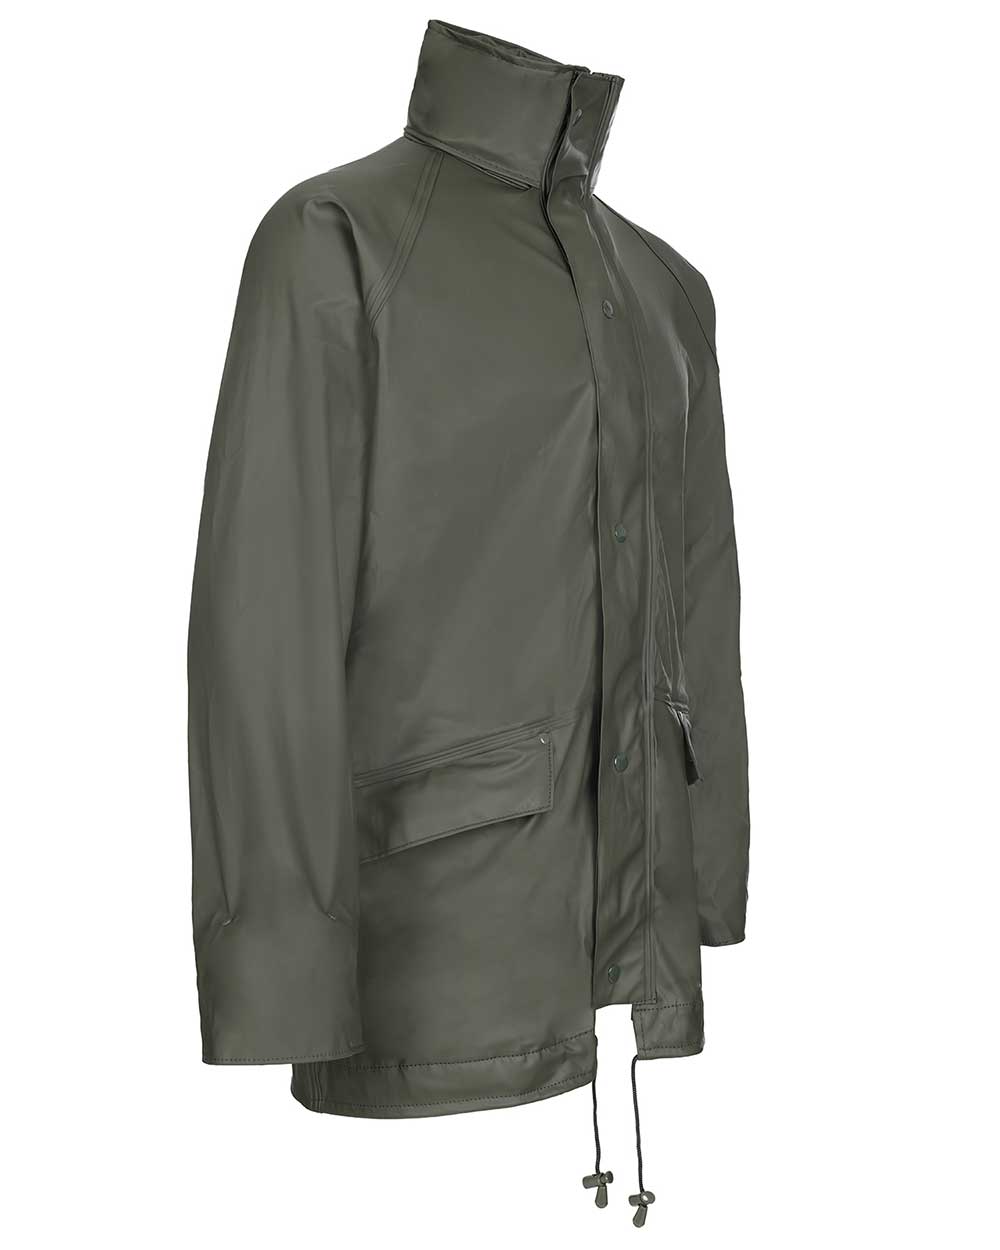 Olive coloured Fort Airflex Fortex Breathable Waterproof Jacket on white background 